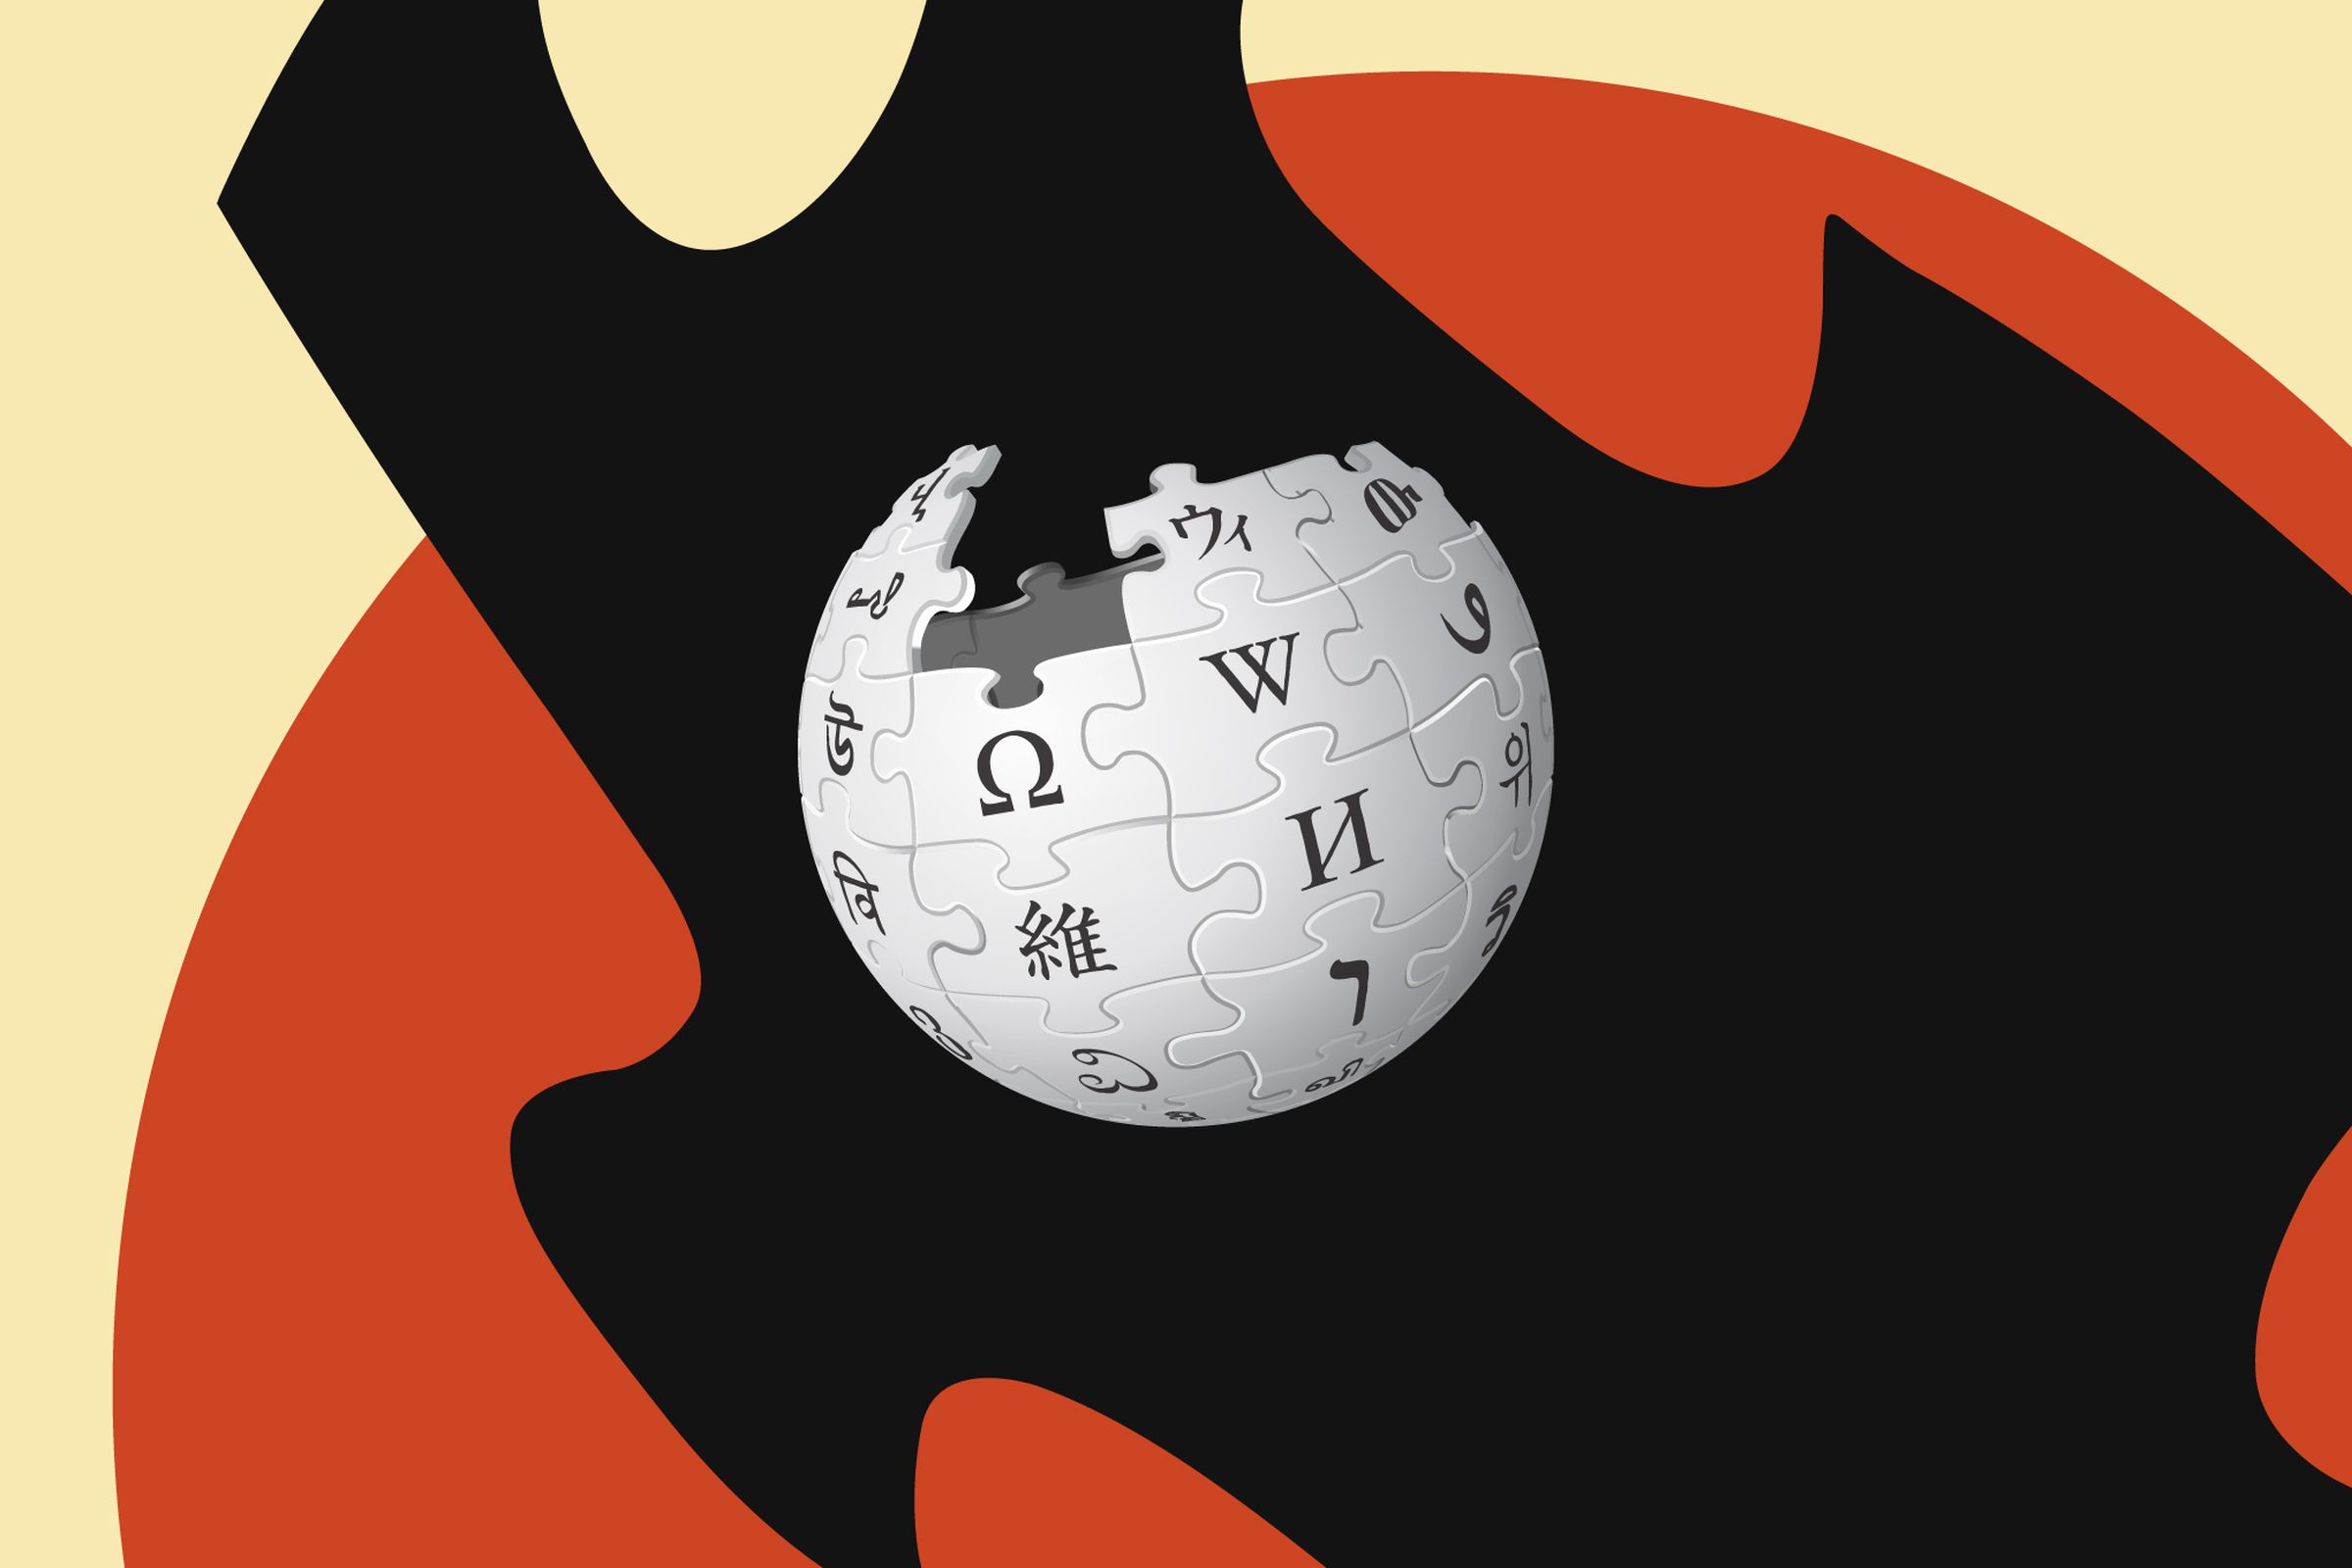 Illustration of the Wikipedia logo on a black, red, and tan background.